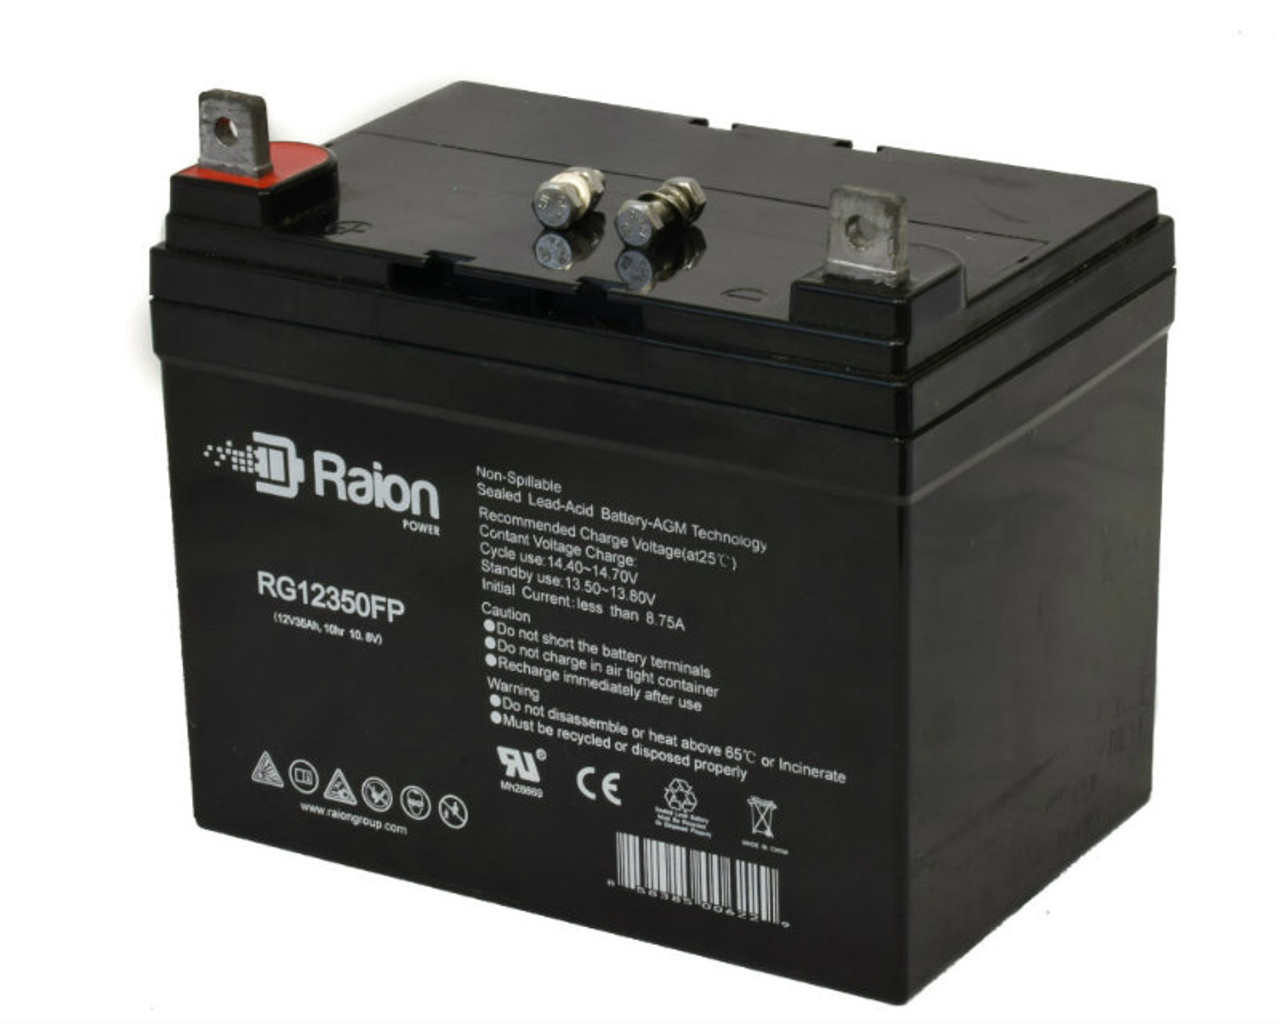 Raion Power Replacement 12V 35Ah RG12350FP Mobility Scooter Battery for Merits Health Products P310-2S C (MP-3C)